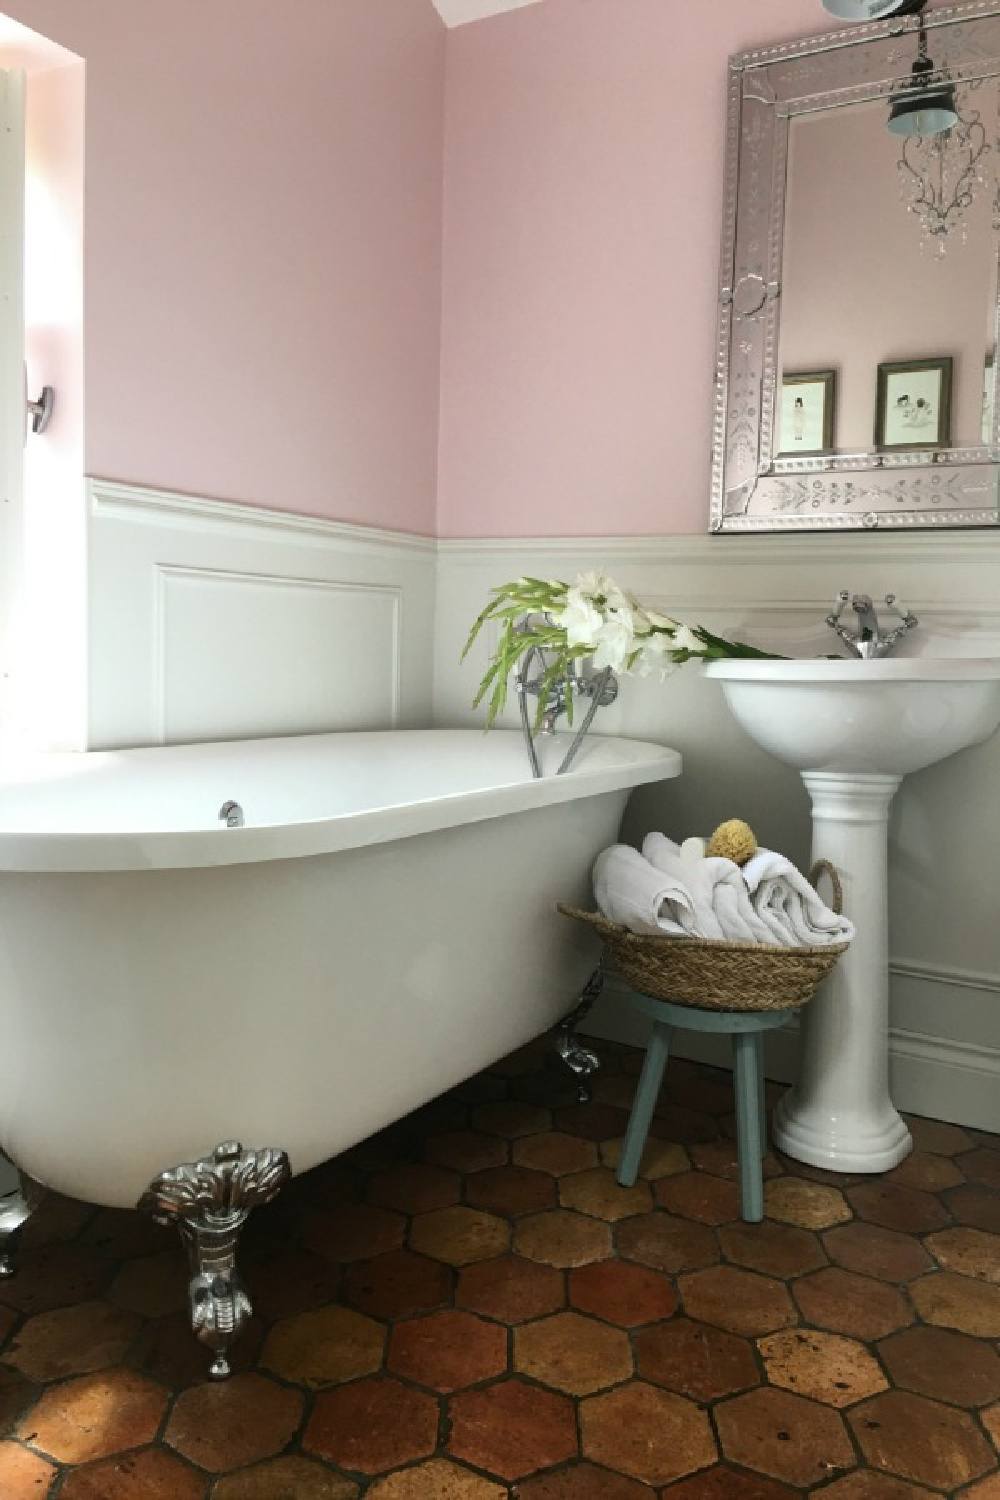 Farrow and Ball Middleton Pink walls in girls bathroom in French farmhouse by Vivi et Margot. Reclaimed antique terracotta tile flooring. Clawfoot tub and pedestal sink. #middletonpink #pinkbathroom #frenchfarmhousebathroom